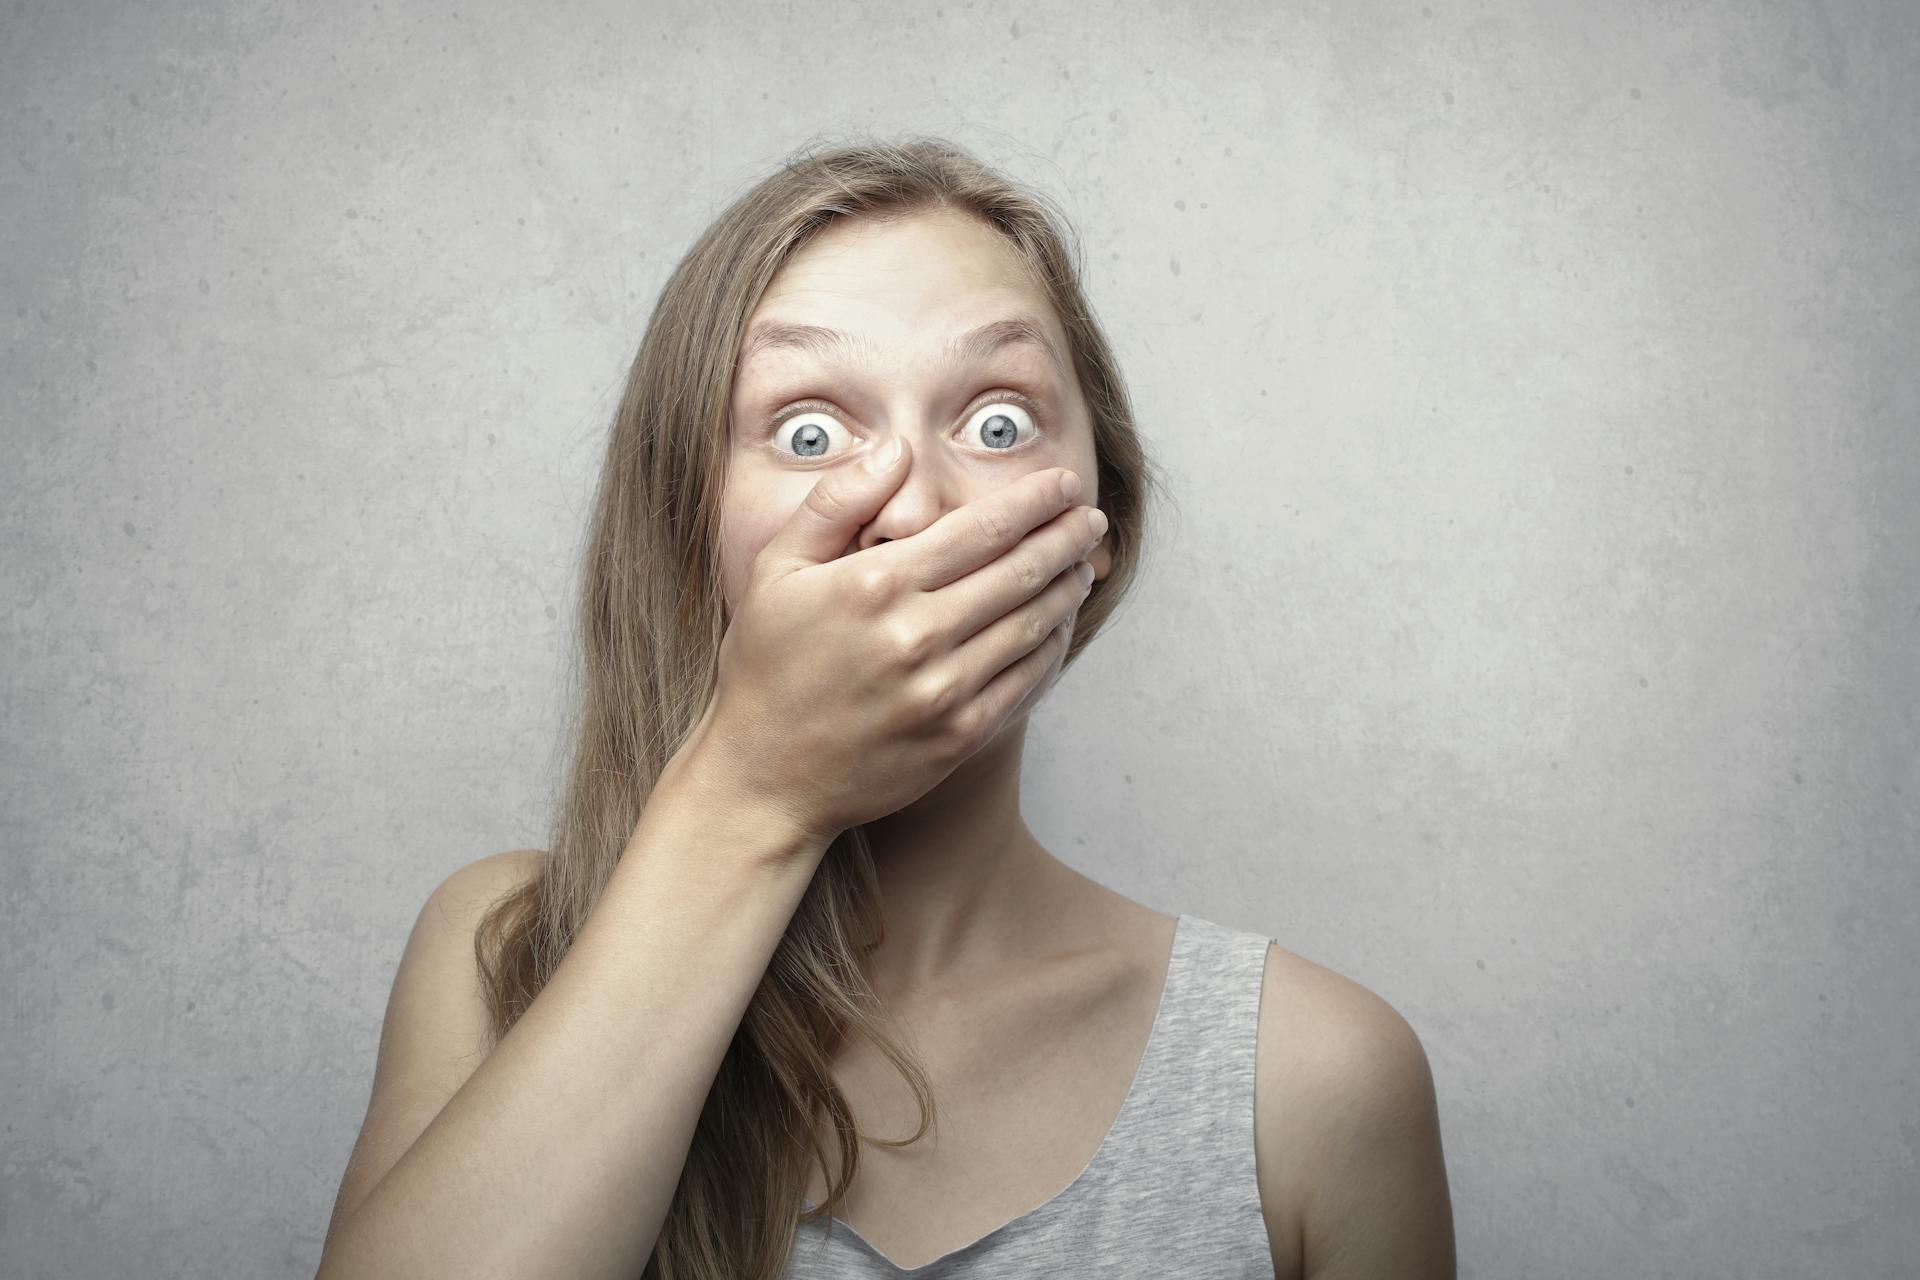 A shocked woman covering her mouth | Source: Pexels